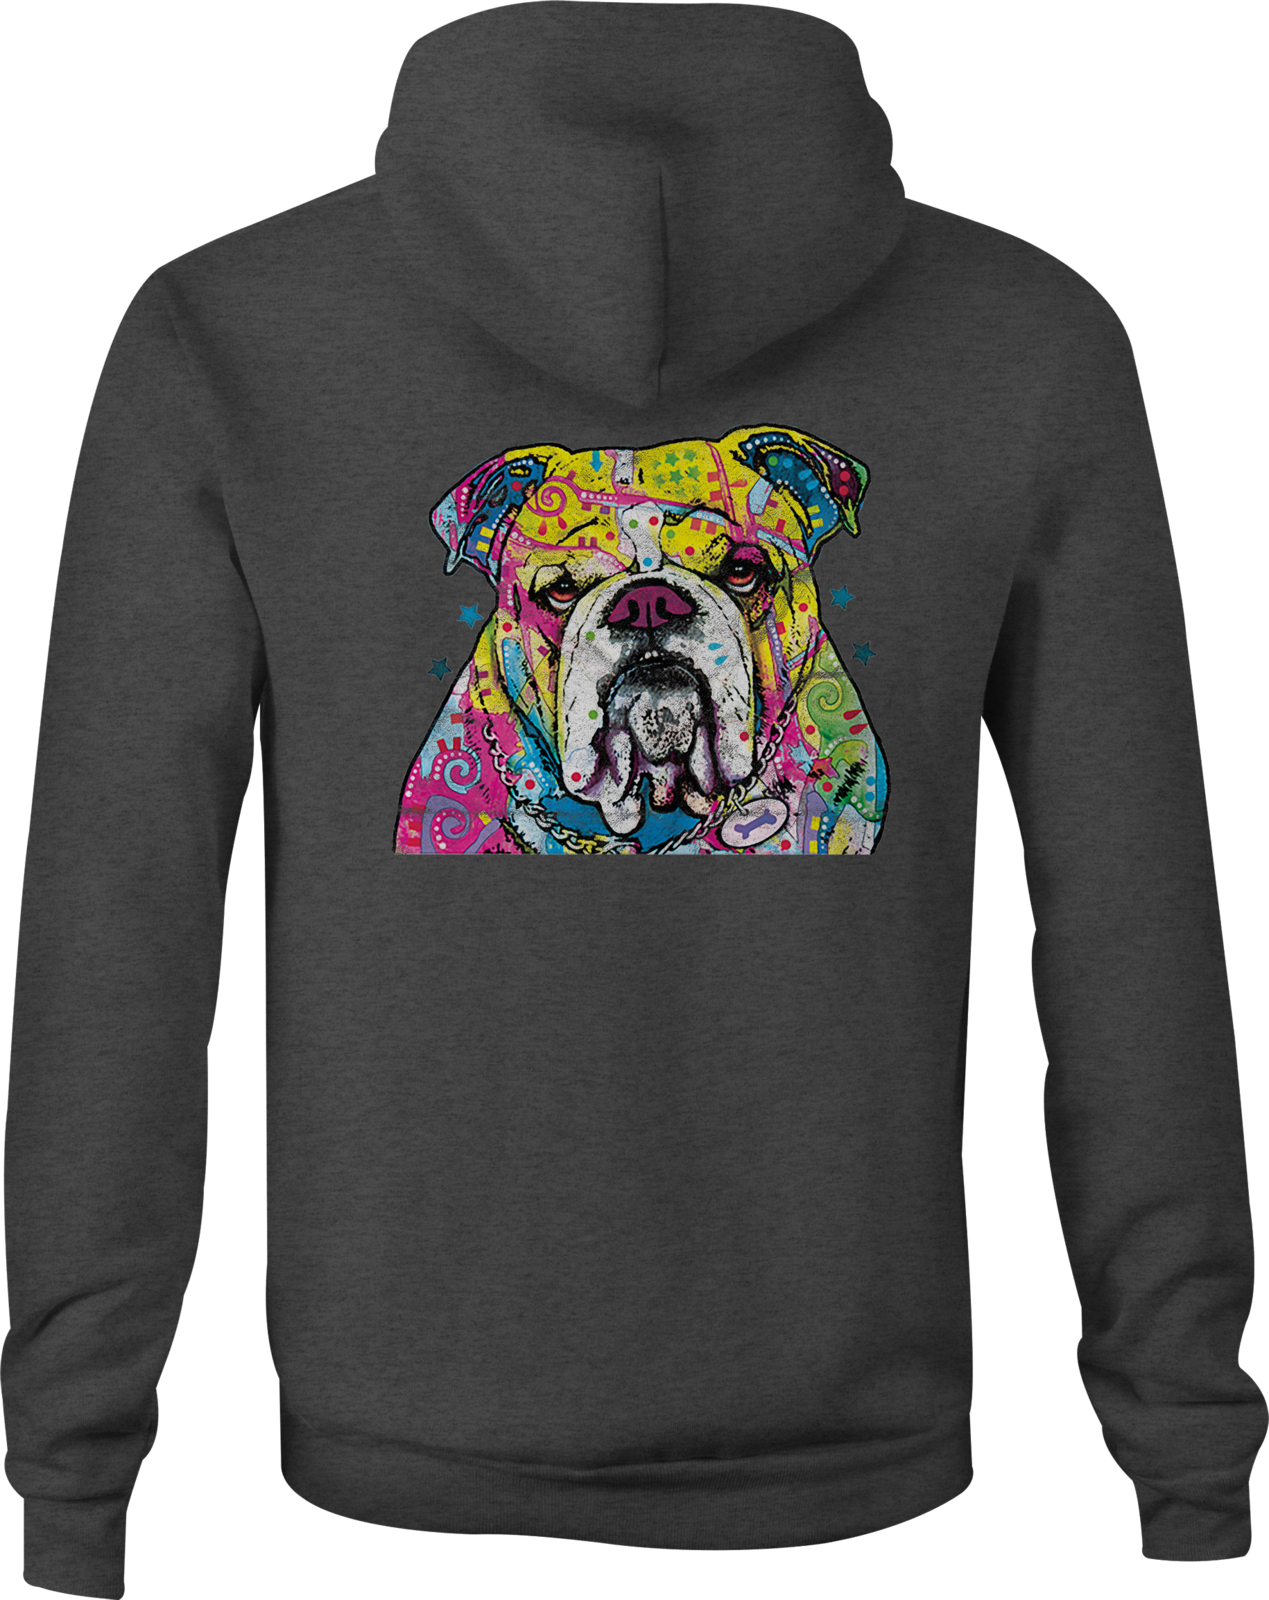 Amazing English Bulldog Hoodie in the world Check it out now 